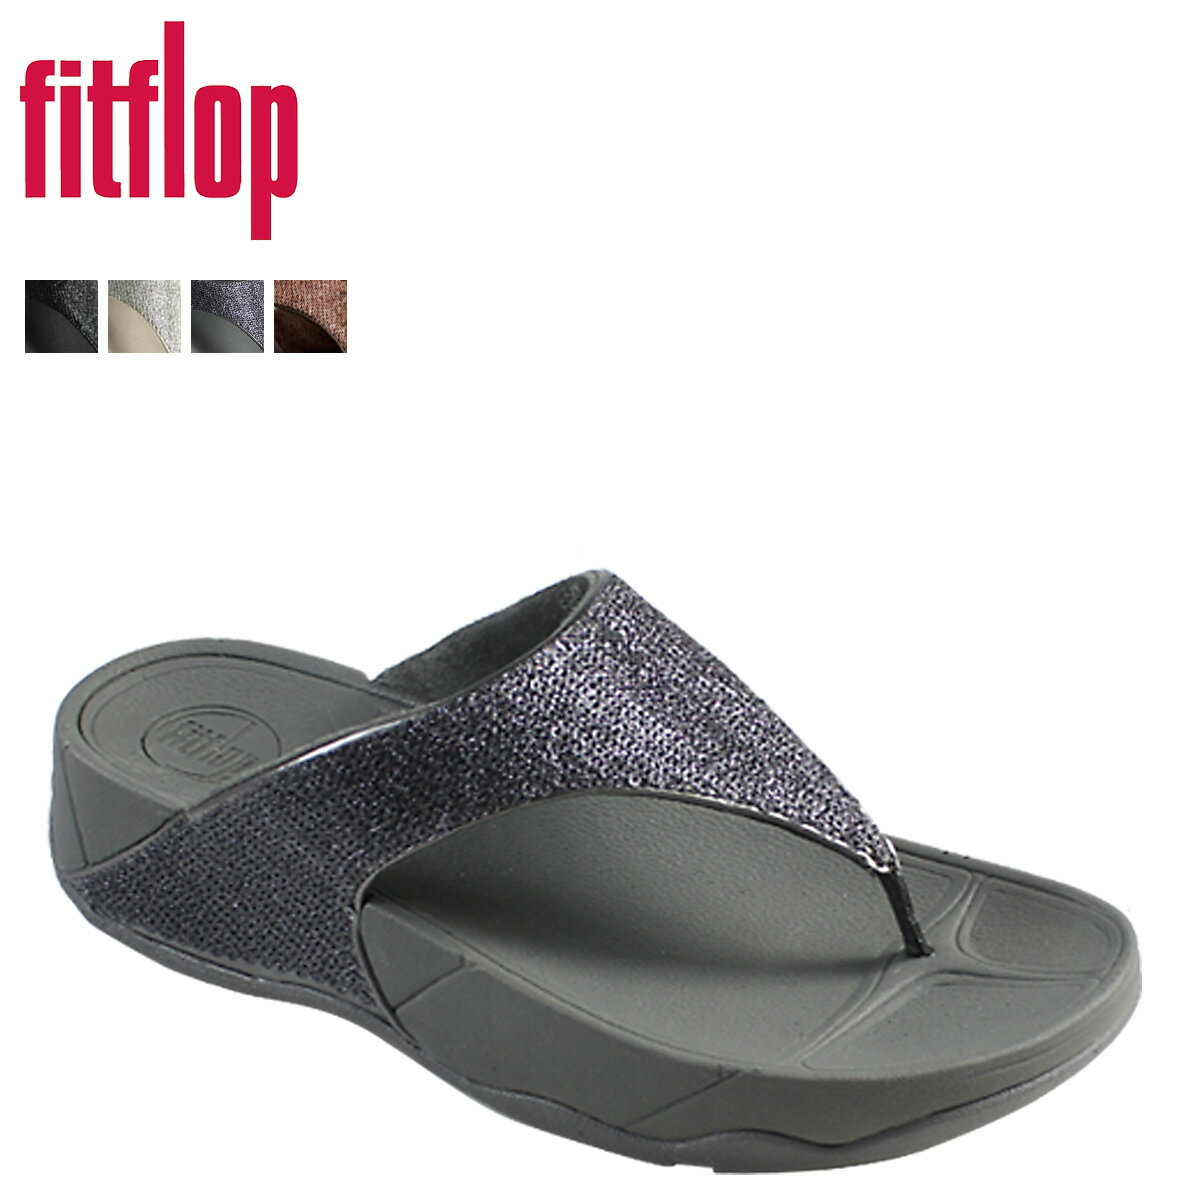 usa women's fitflop